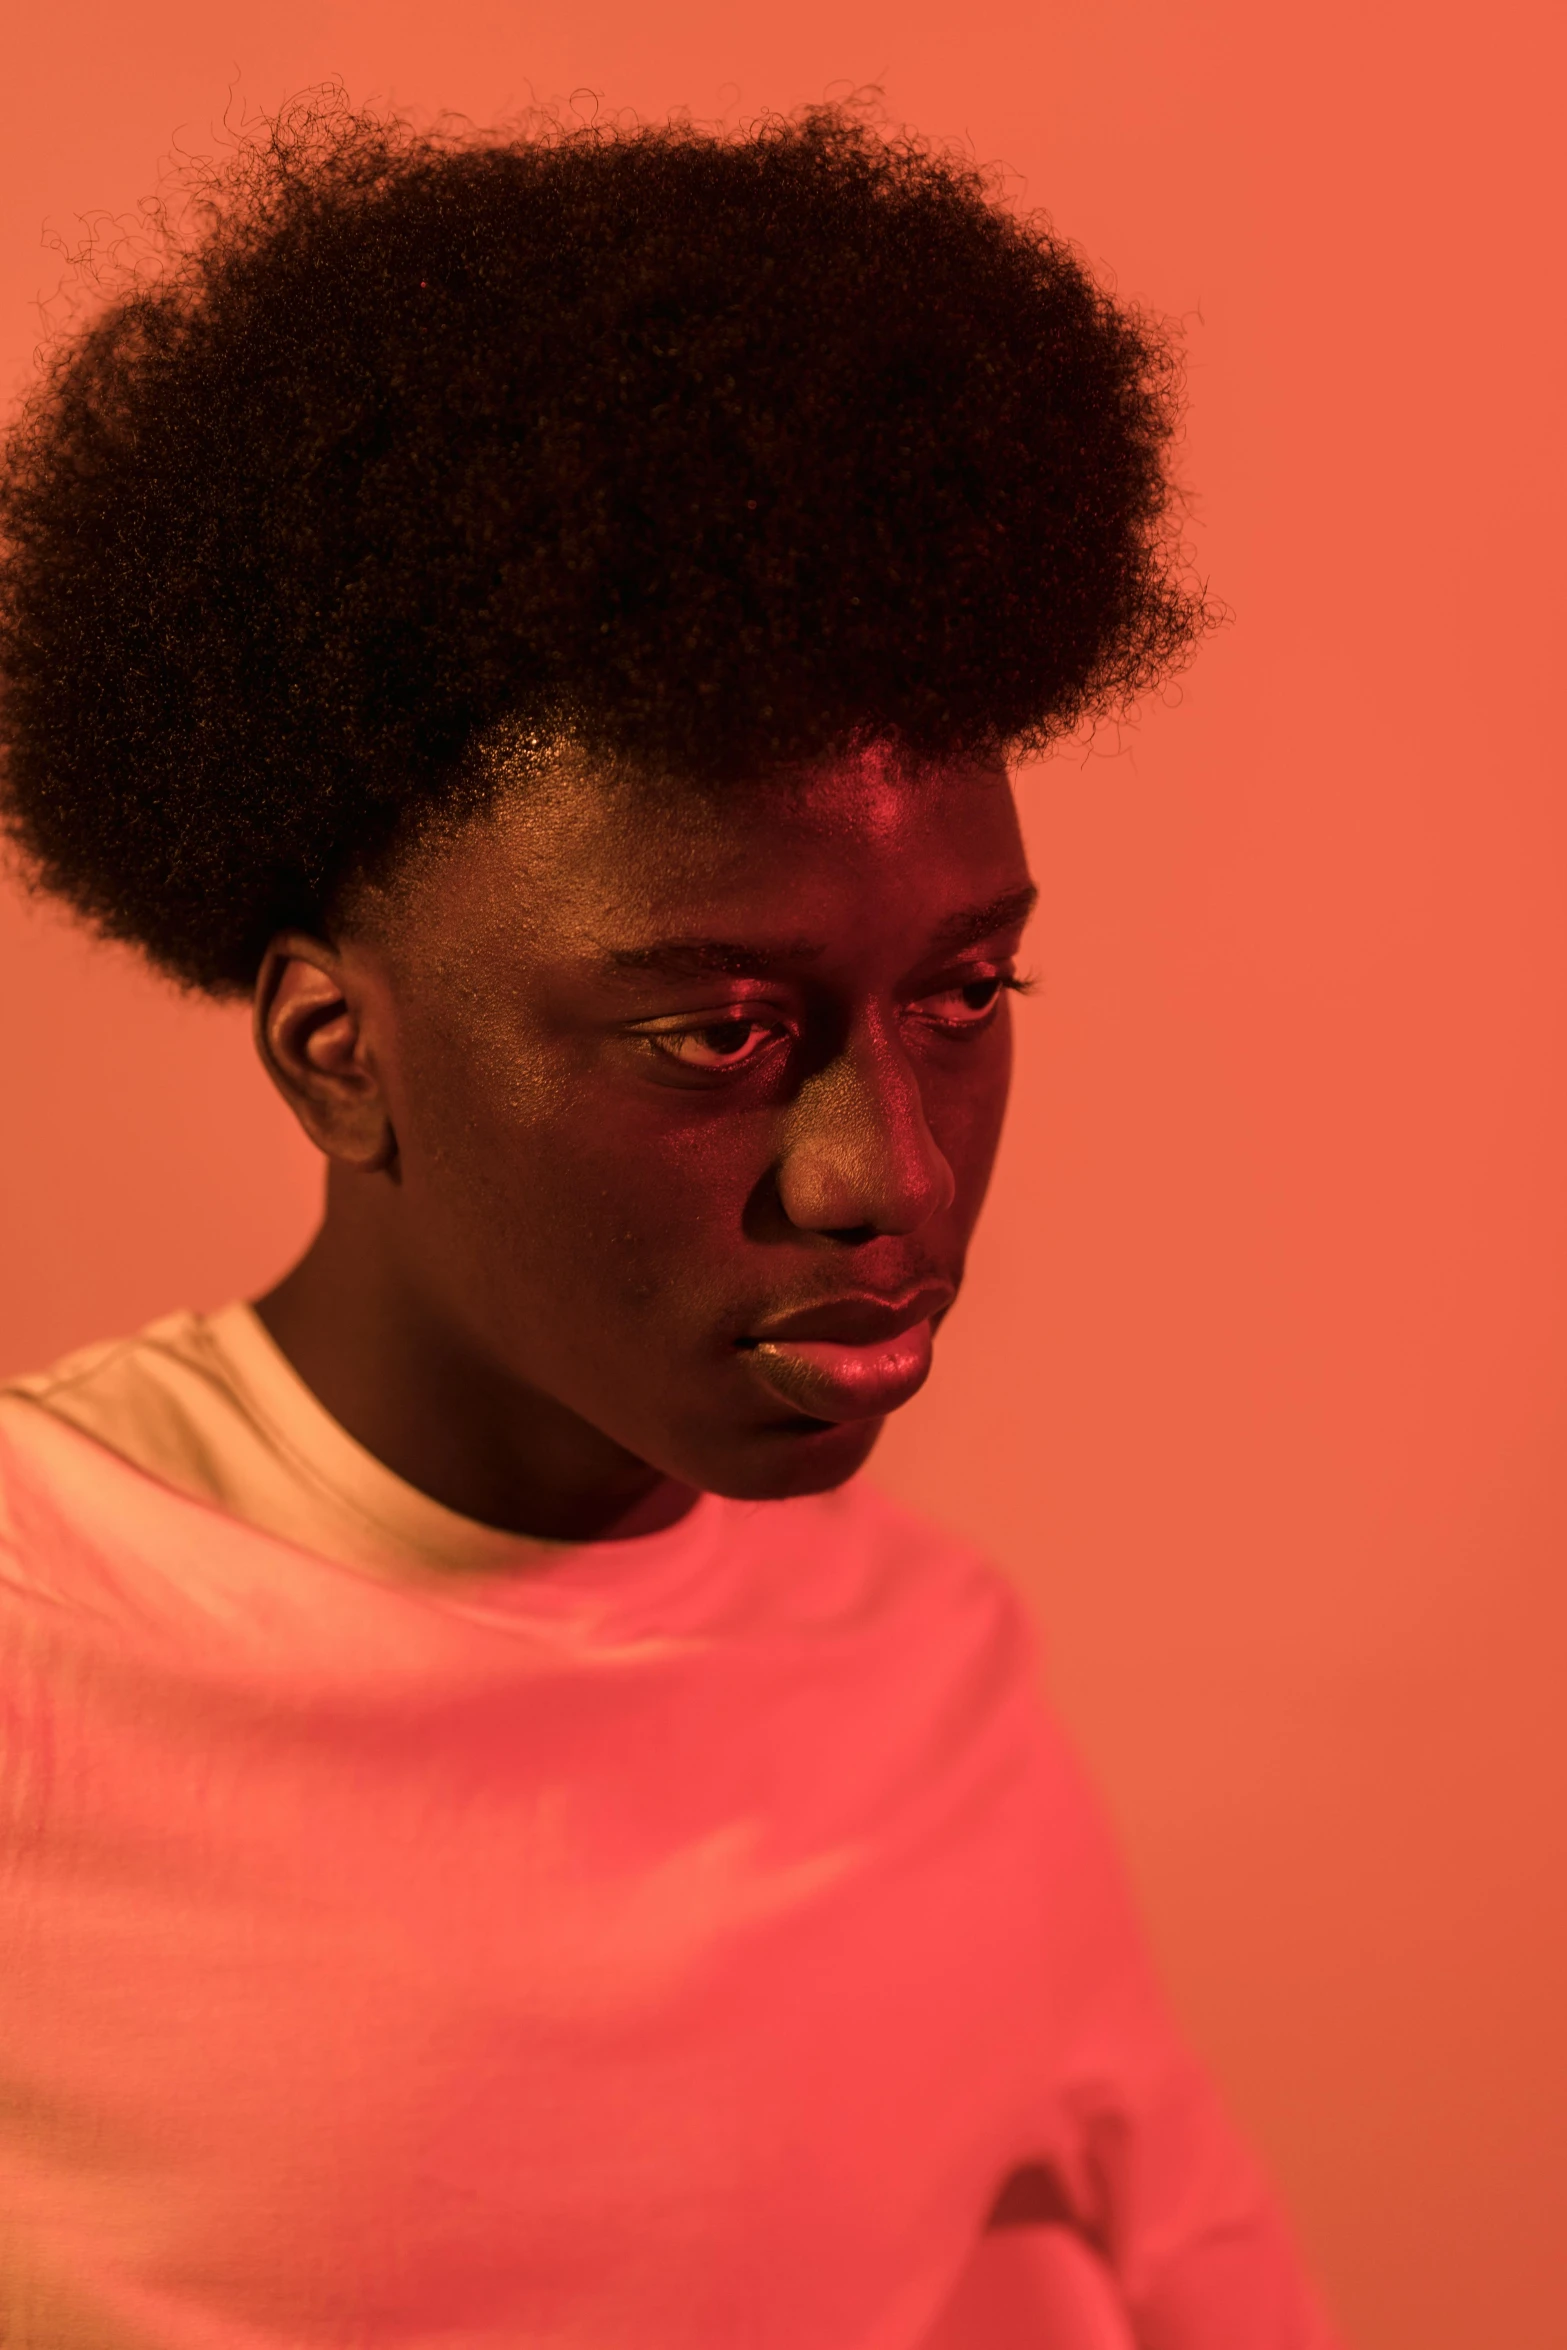 a woman standing in front of a pink wall, an album cover, pexels contest winner, hyperrealism, black man with afro hair, soft red lights, looks sad and solemn, portrait androgynous girl